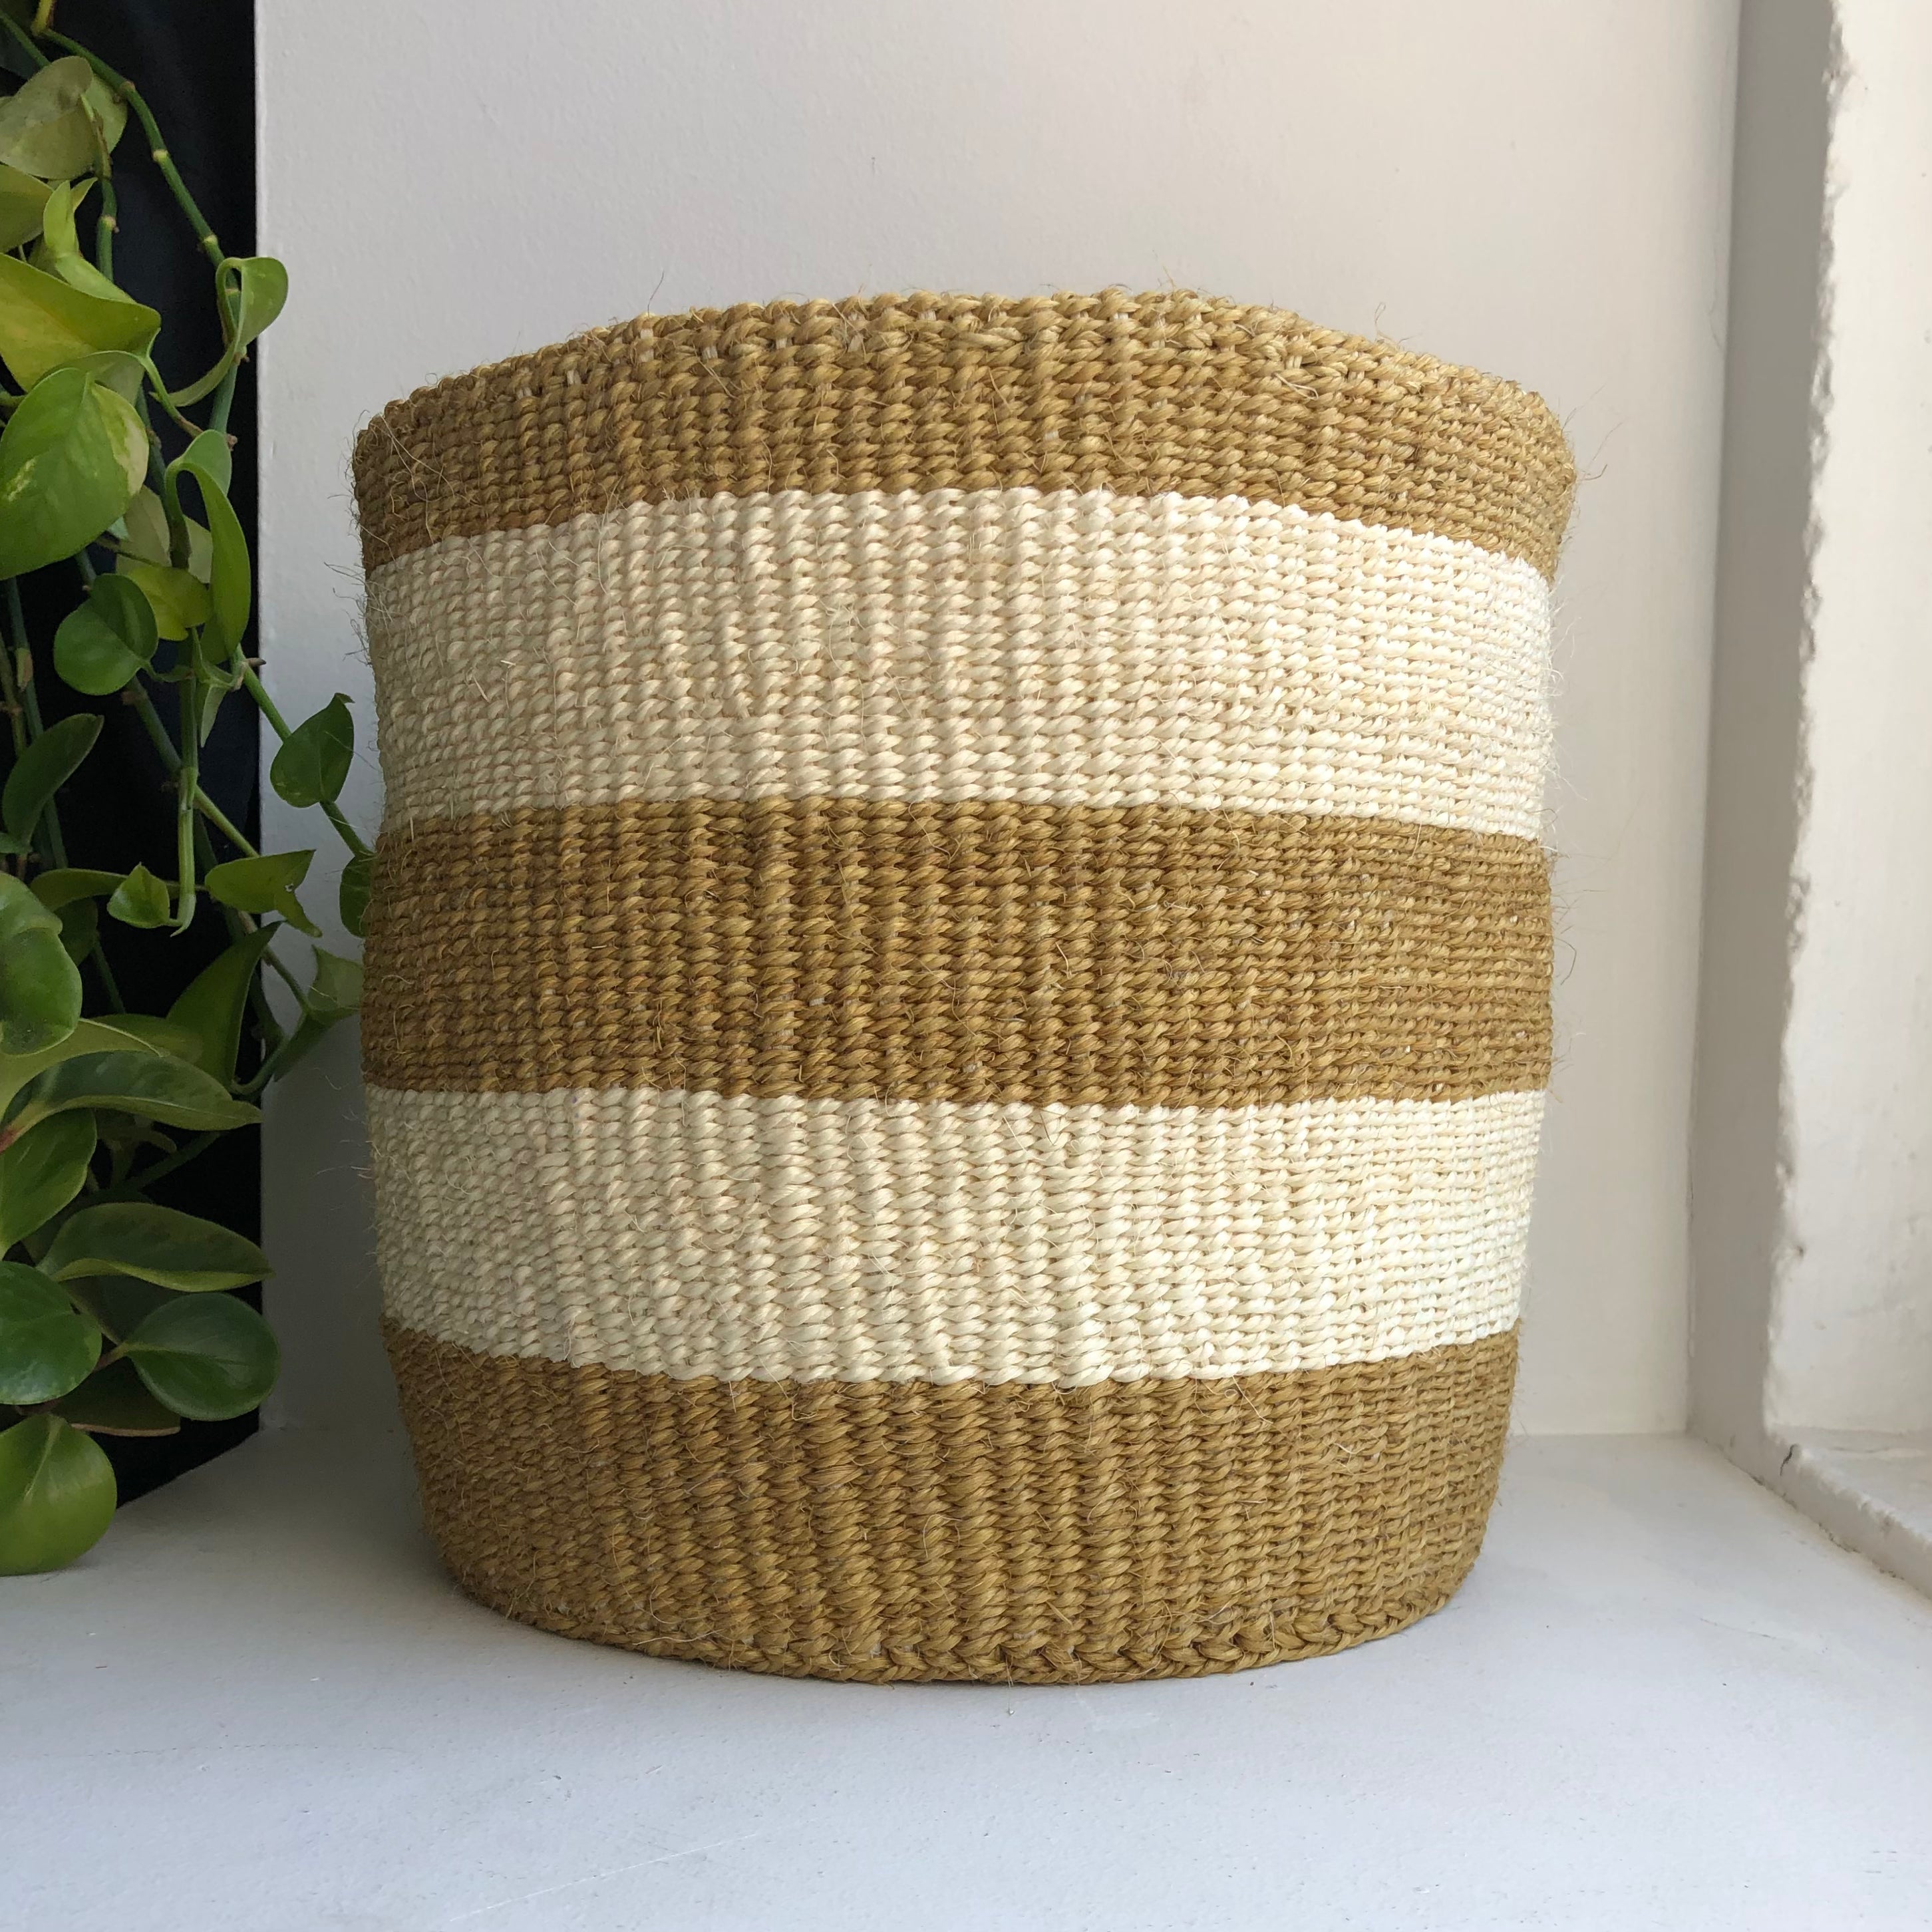 10&quot; sisal basket with natural tone stripes